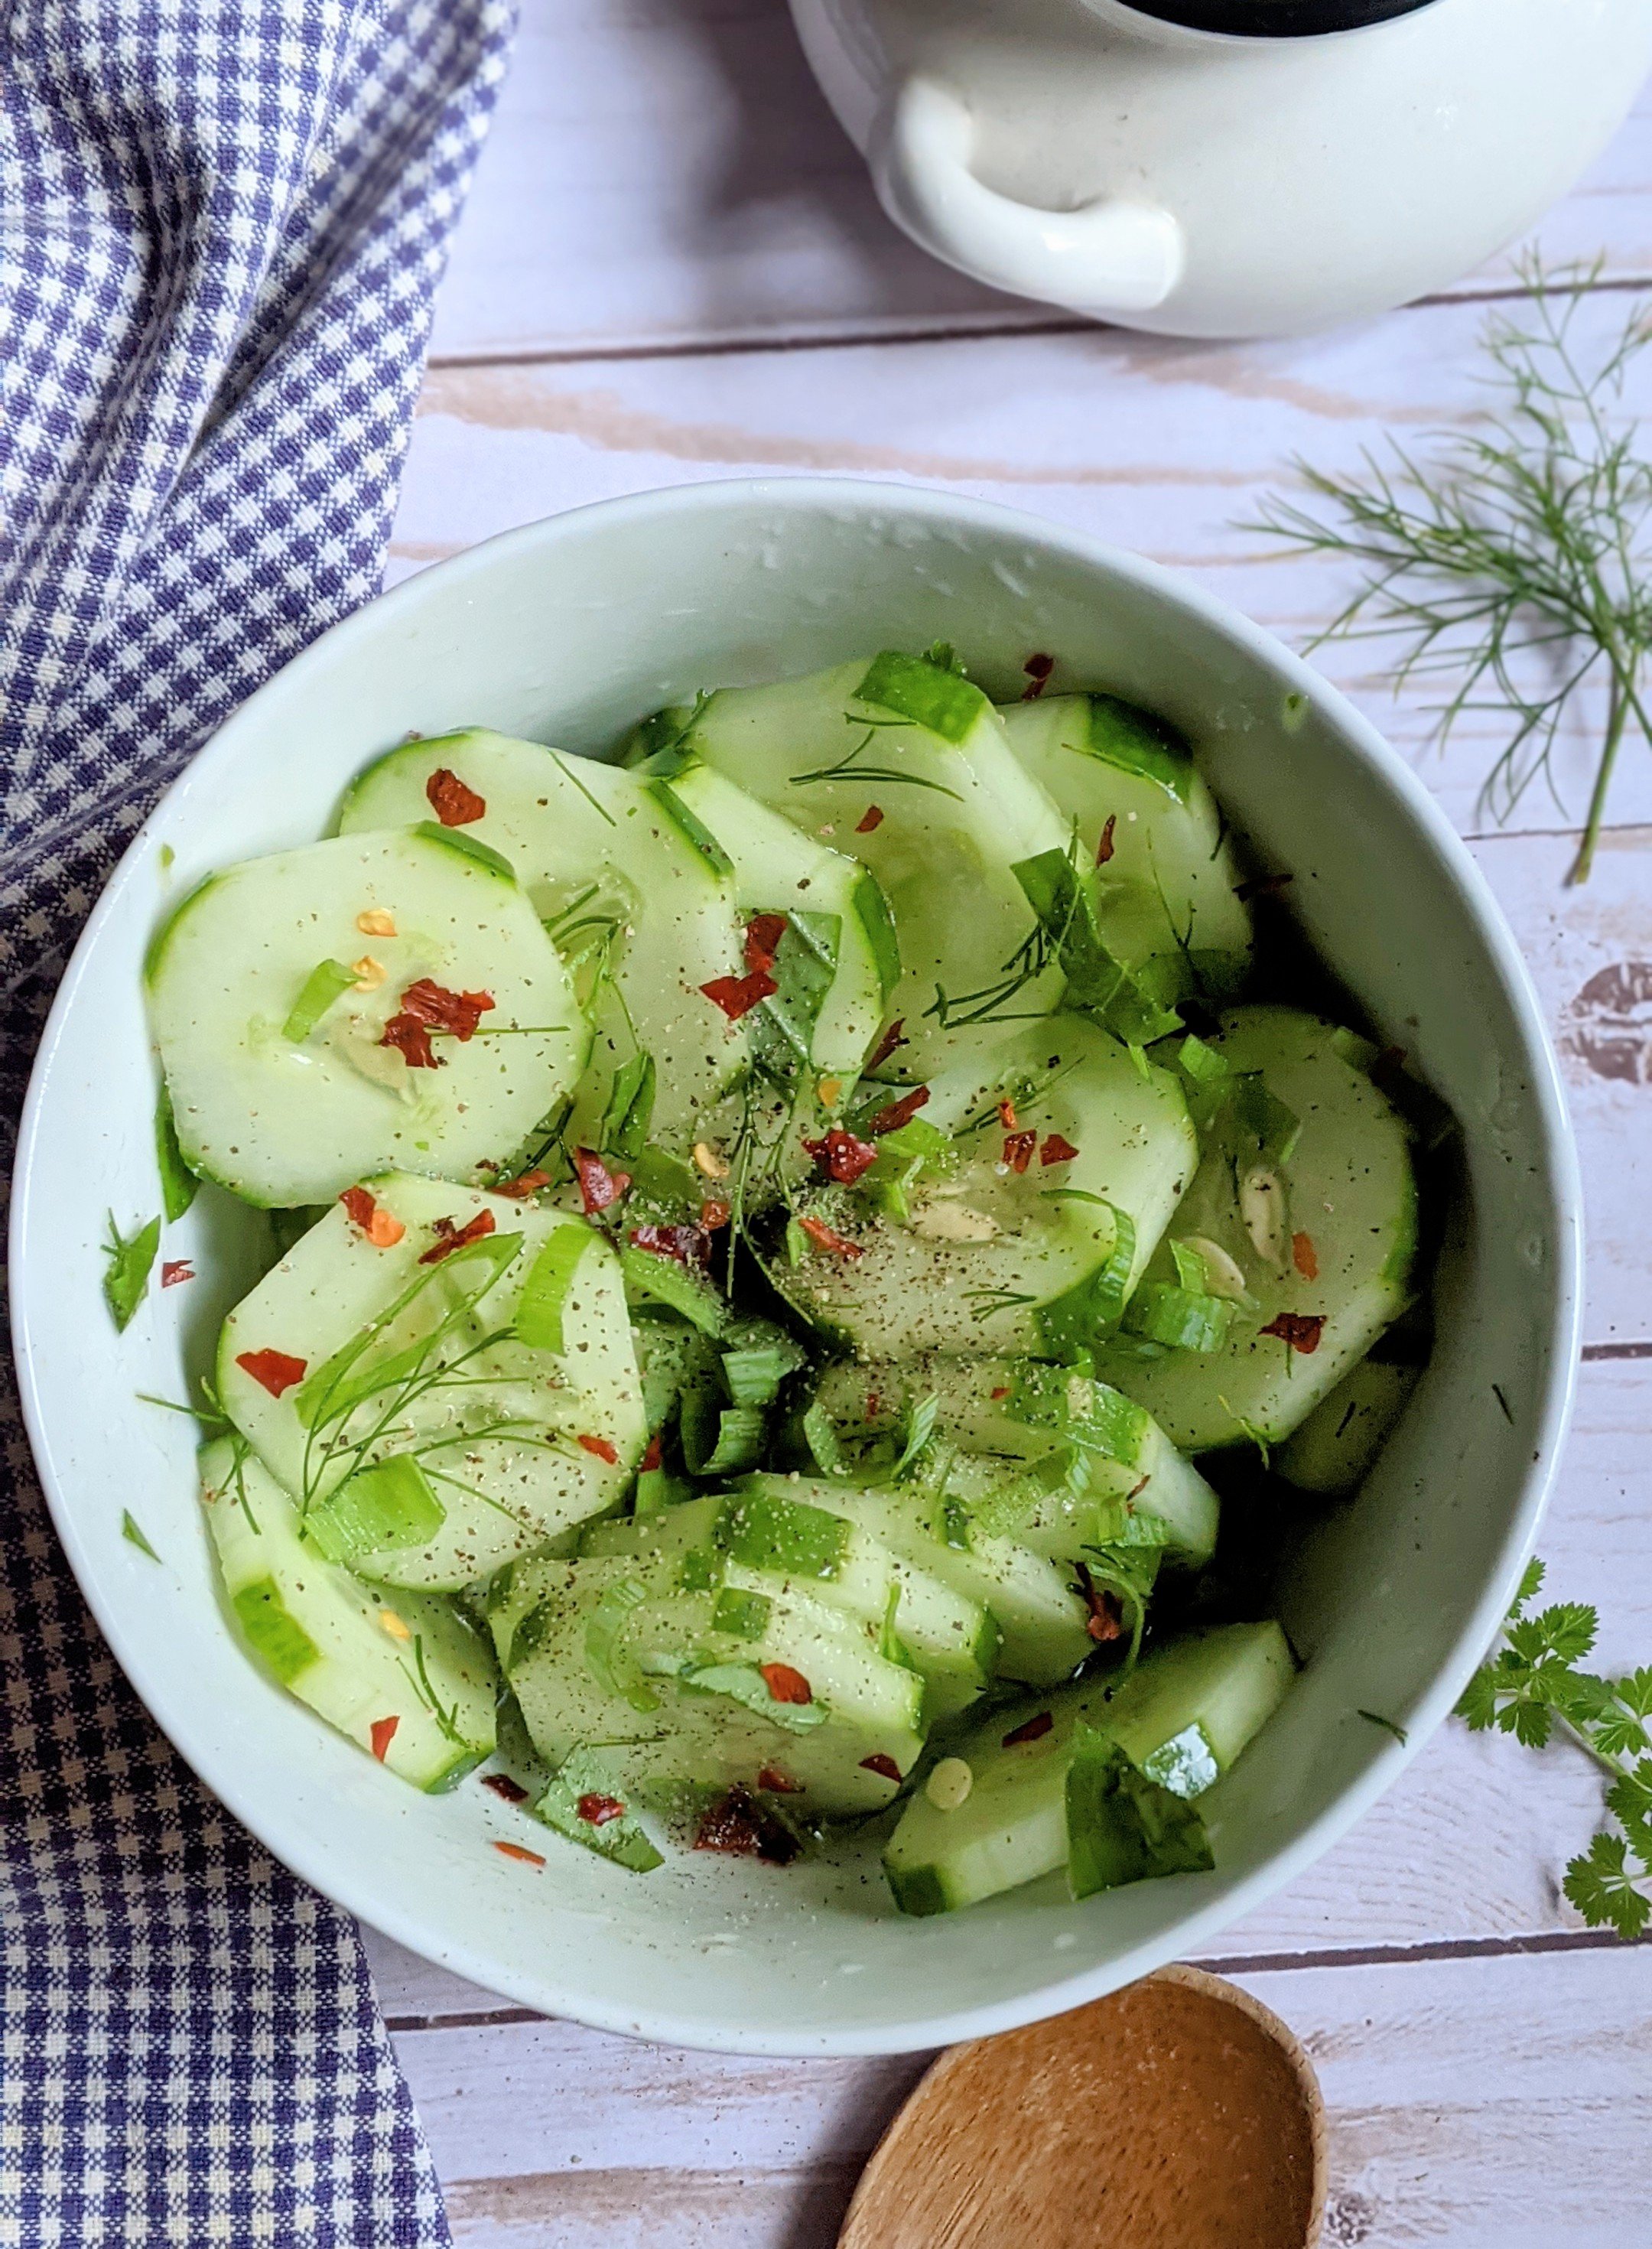 herb and cucumber salad recipe with vinegar and sugar dill cucumber salad with parsley and basil recipe rice vinegar cucumber salads for summer recipes for parties with garden cucumbers gluten free vegan meatless side dishes